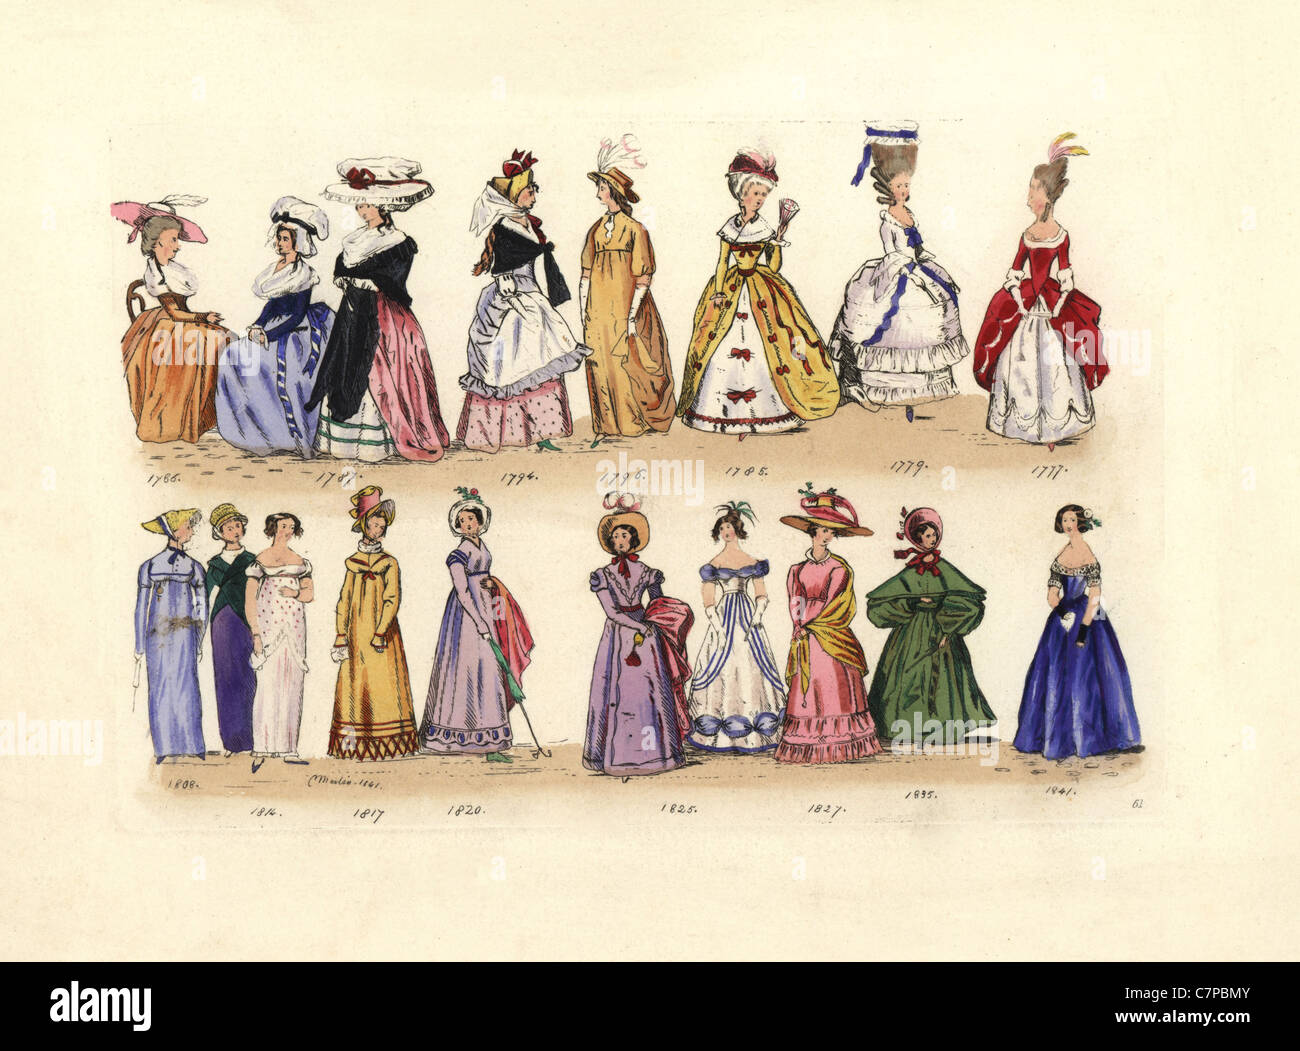 Women's fashion from 1786 to 1841, reigns of George III to Victoria, from Pocket Books, Ladies' Magazines, etc. Stock Photo